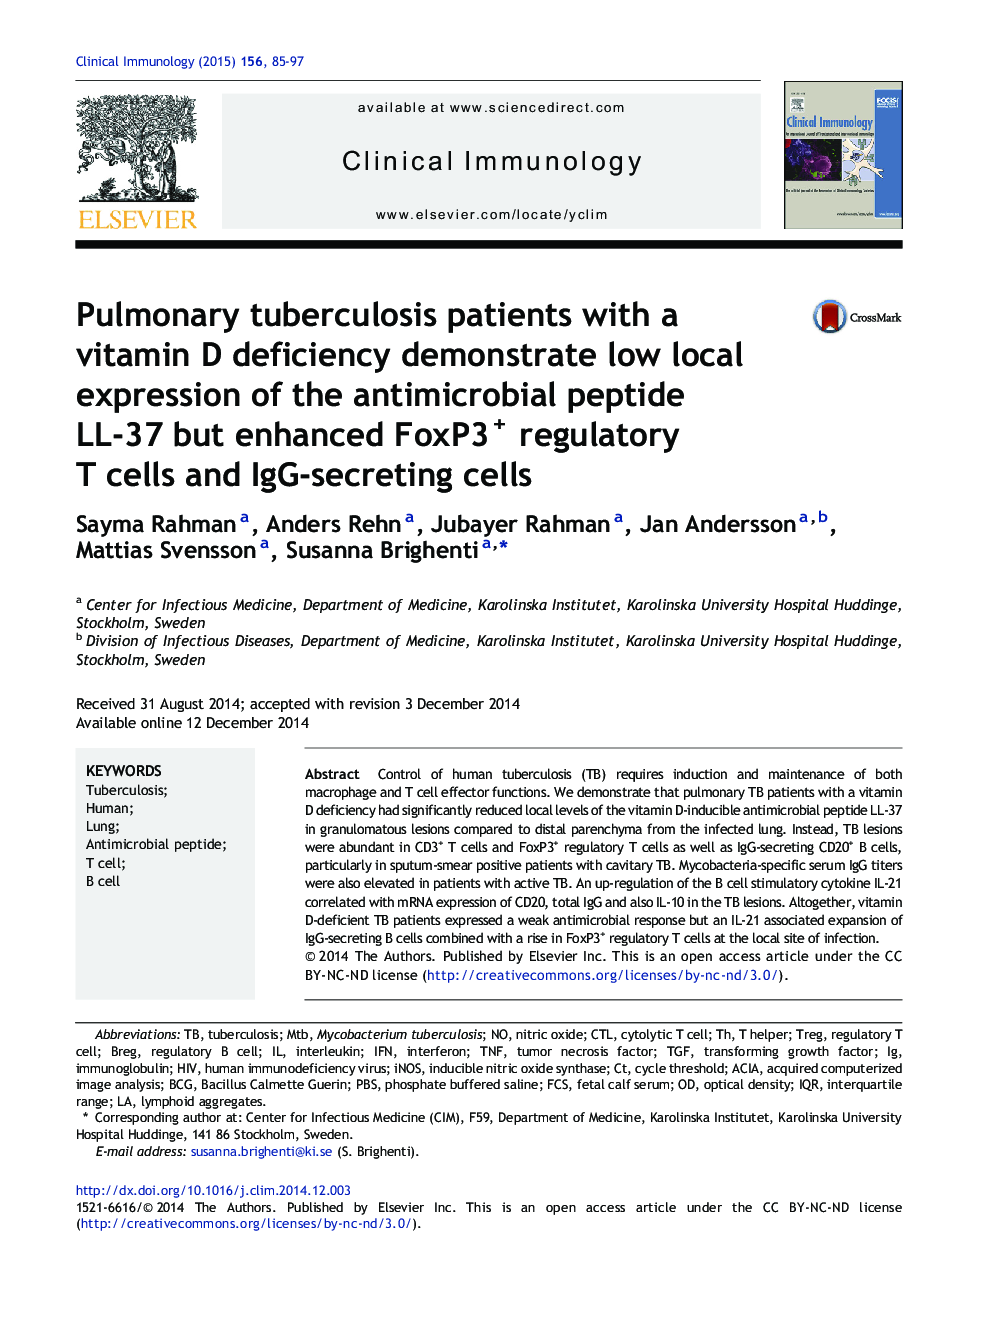 Pulmonary tuberculosis patients with a vitamin D deficiency demonstrate low local expression of the antimicrobial peptide LL-37 but enhanced FoxP3+ regulatory T cells and IgG-secreting cells